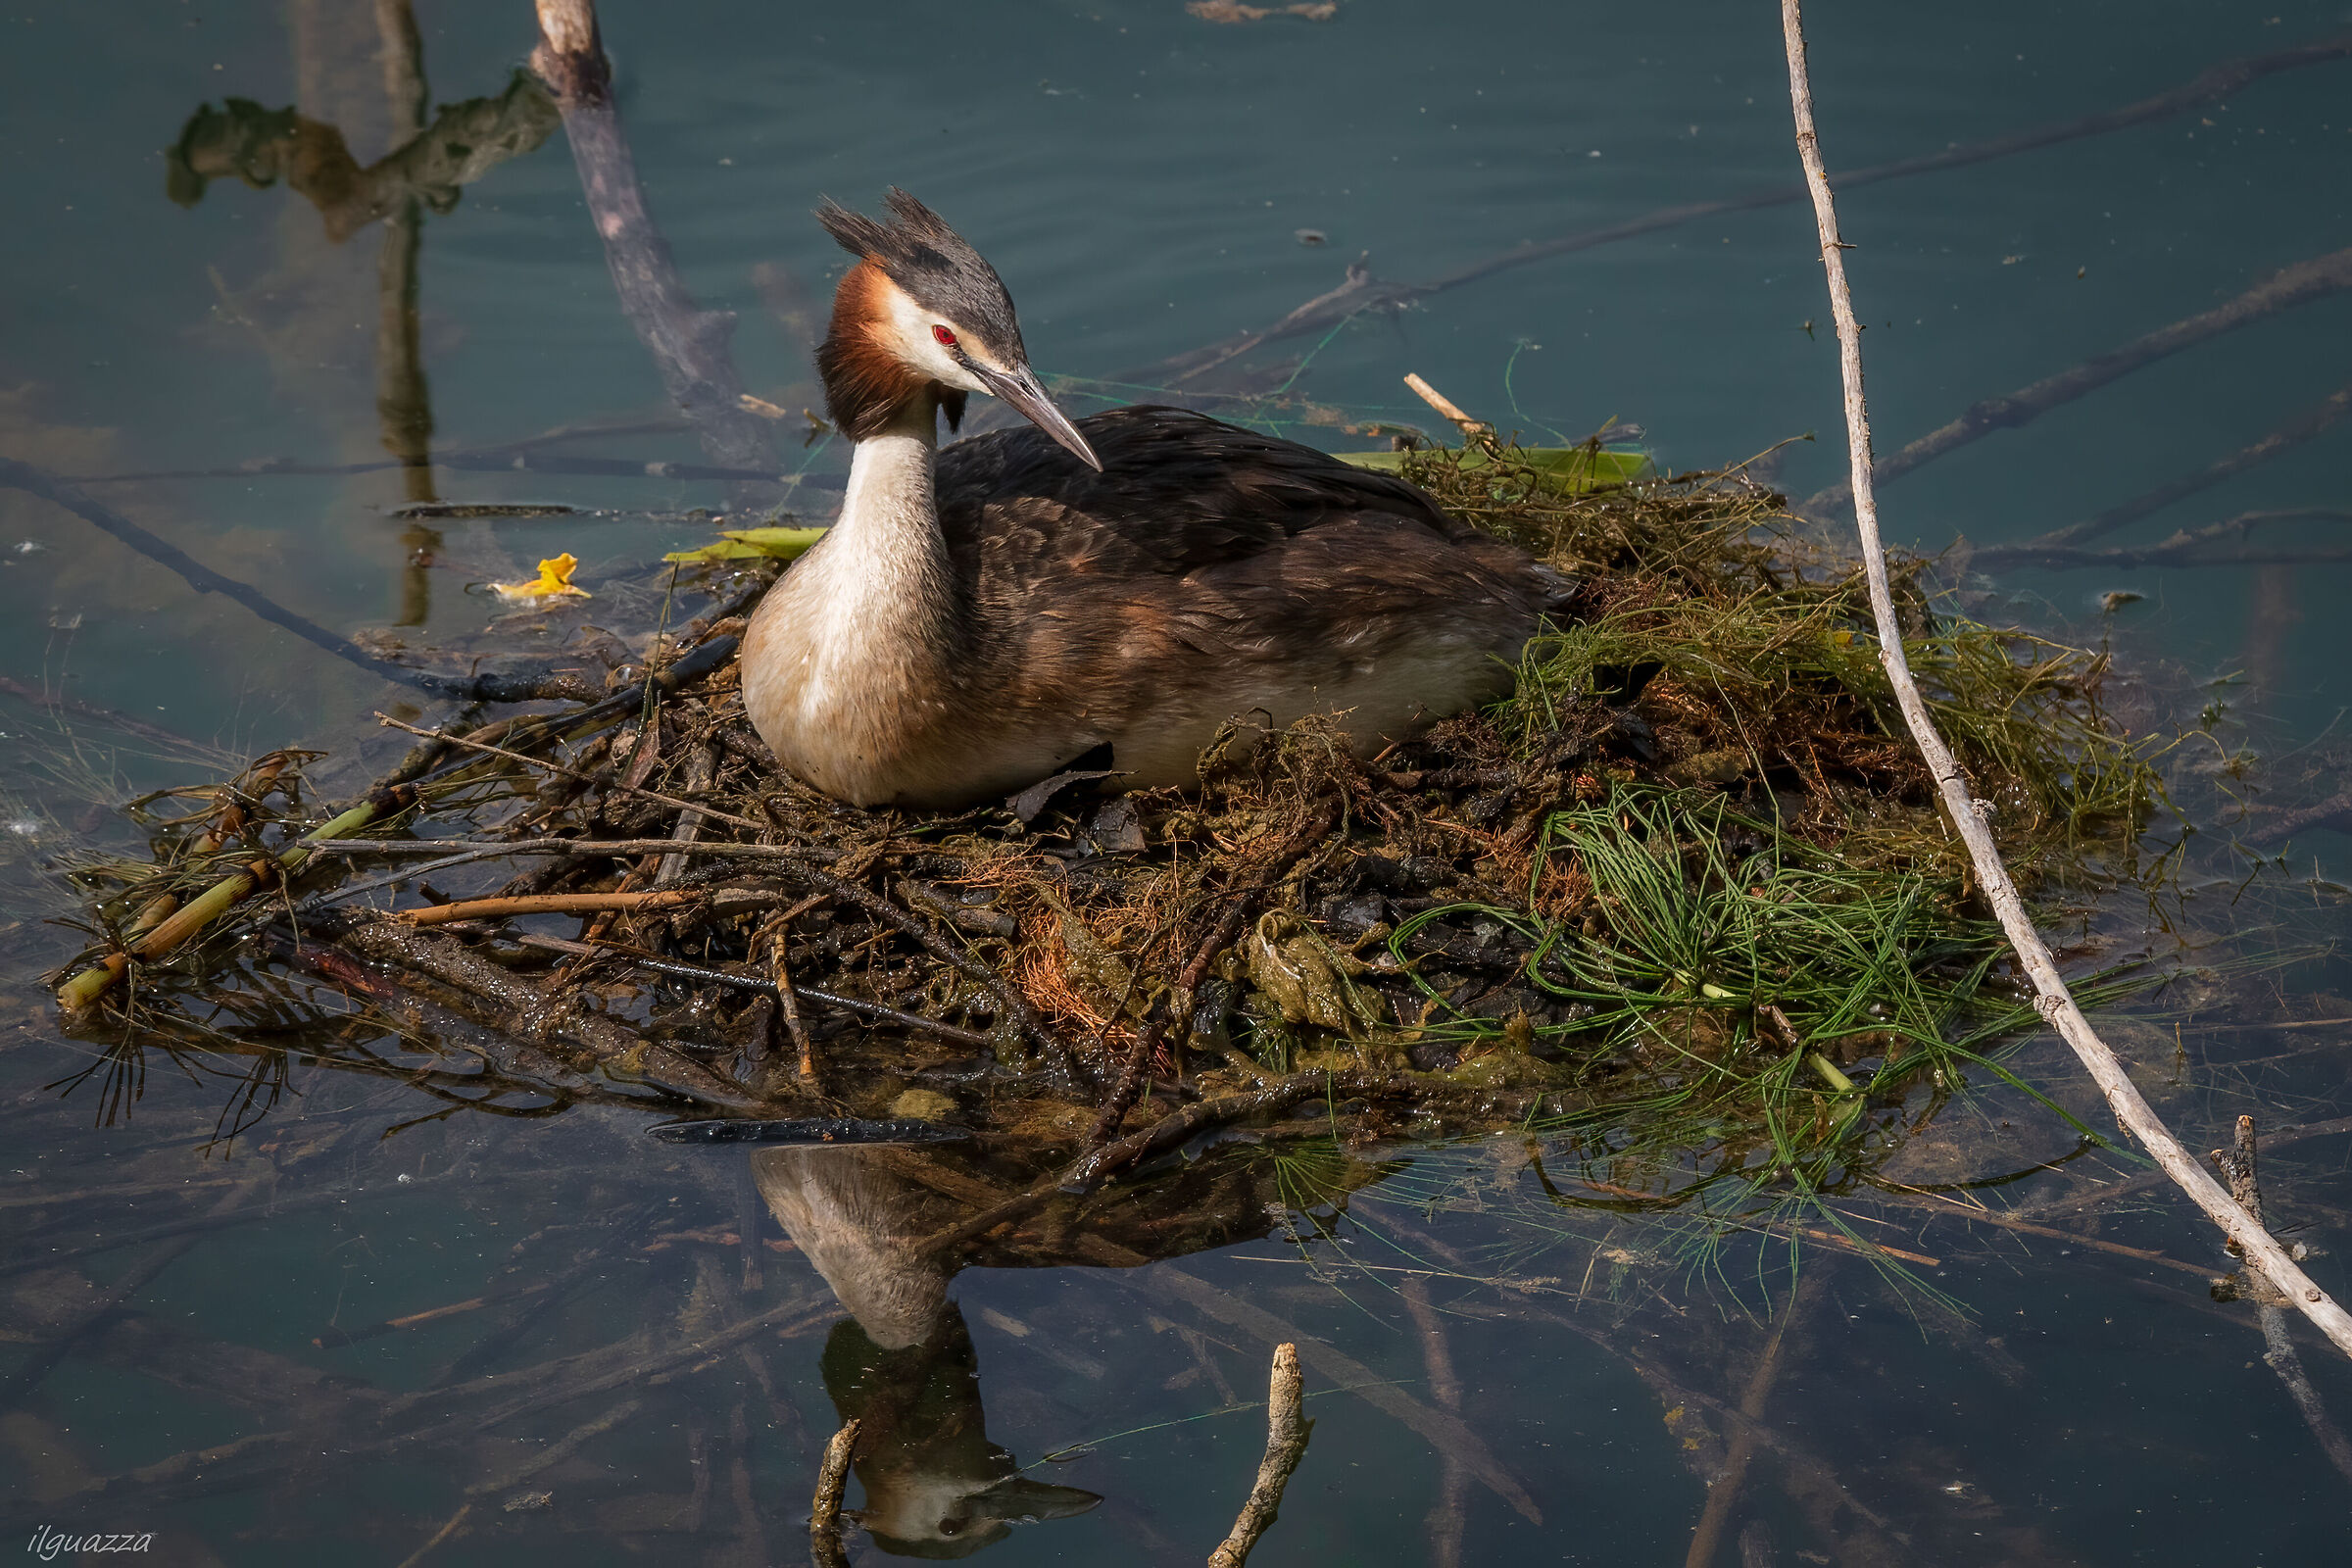 Great grebe at the nest...